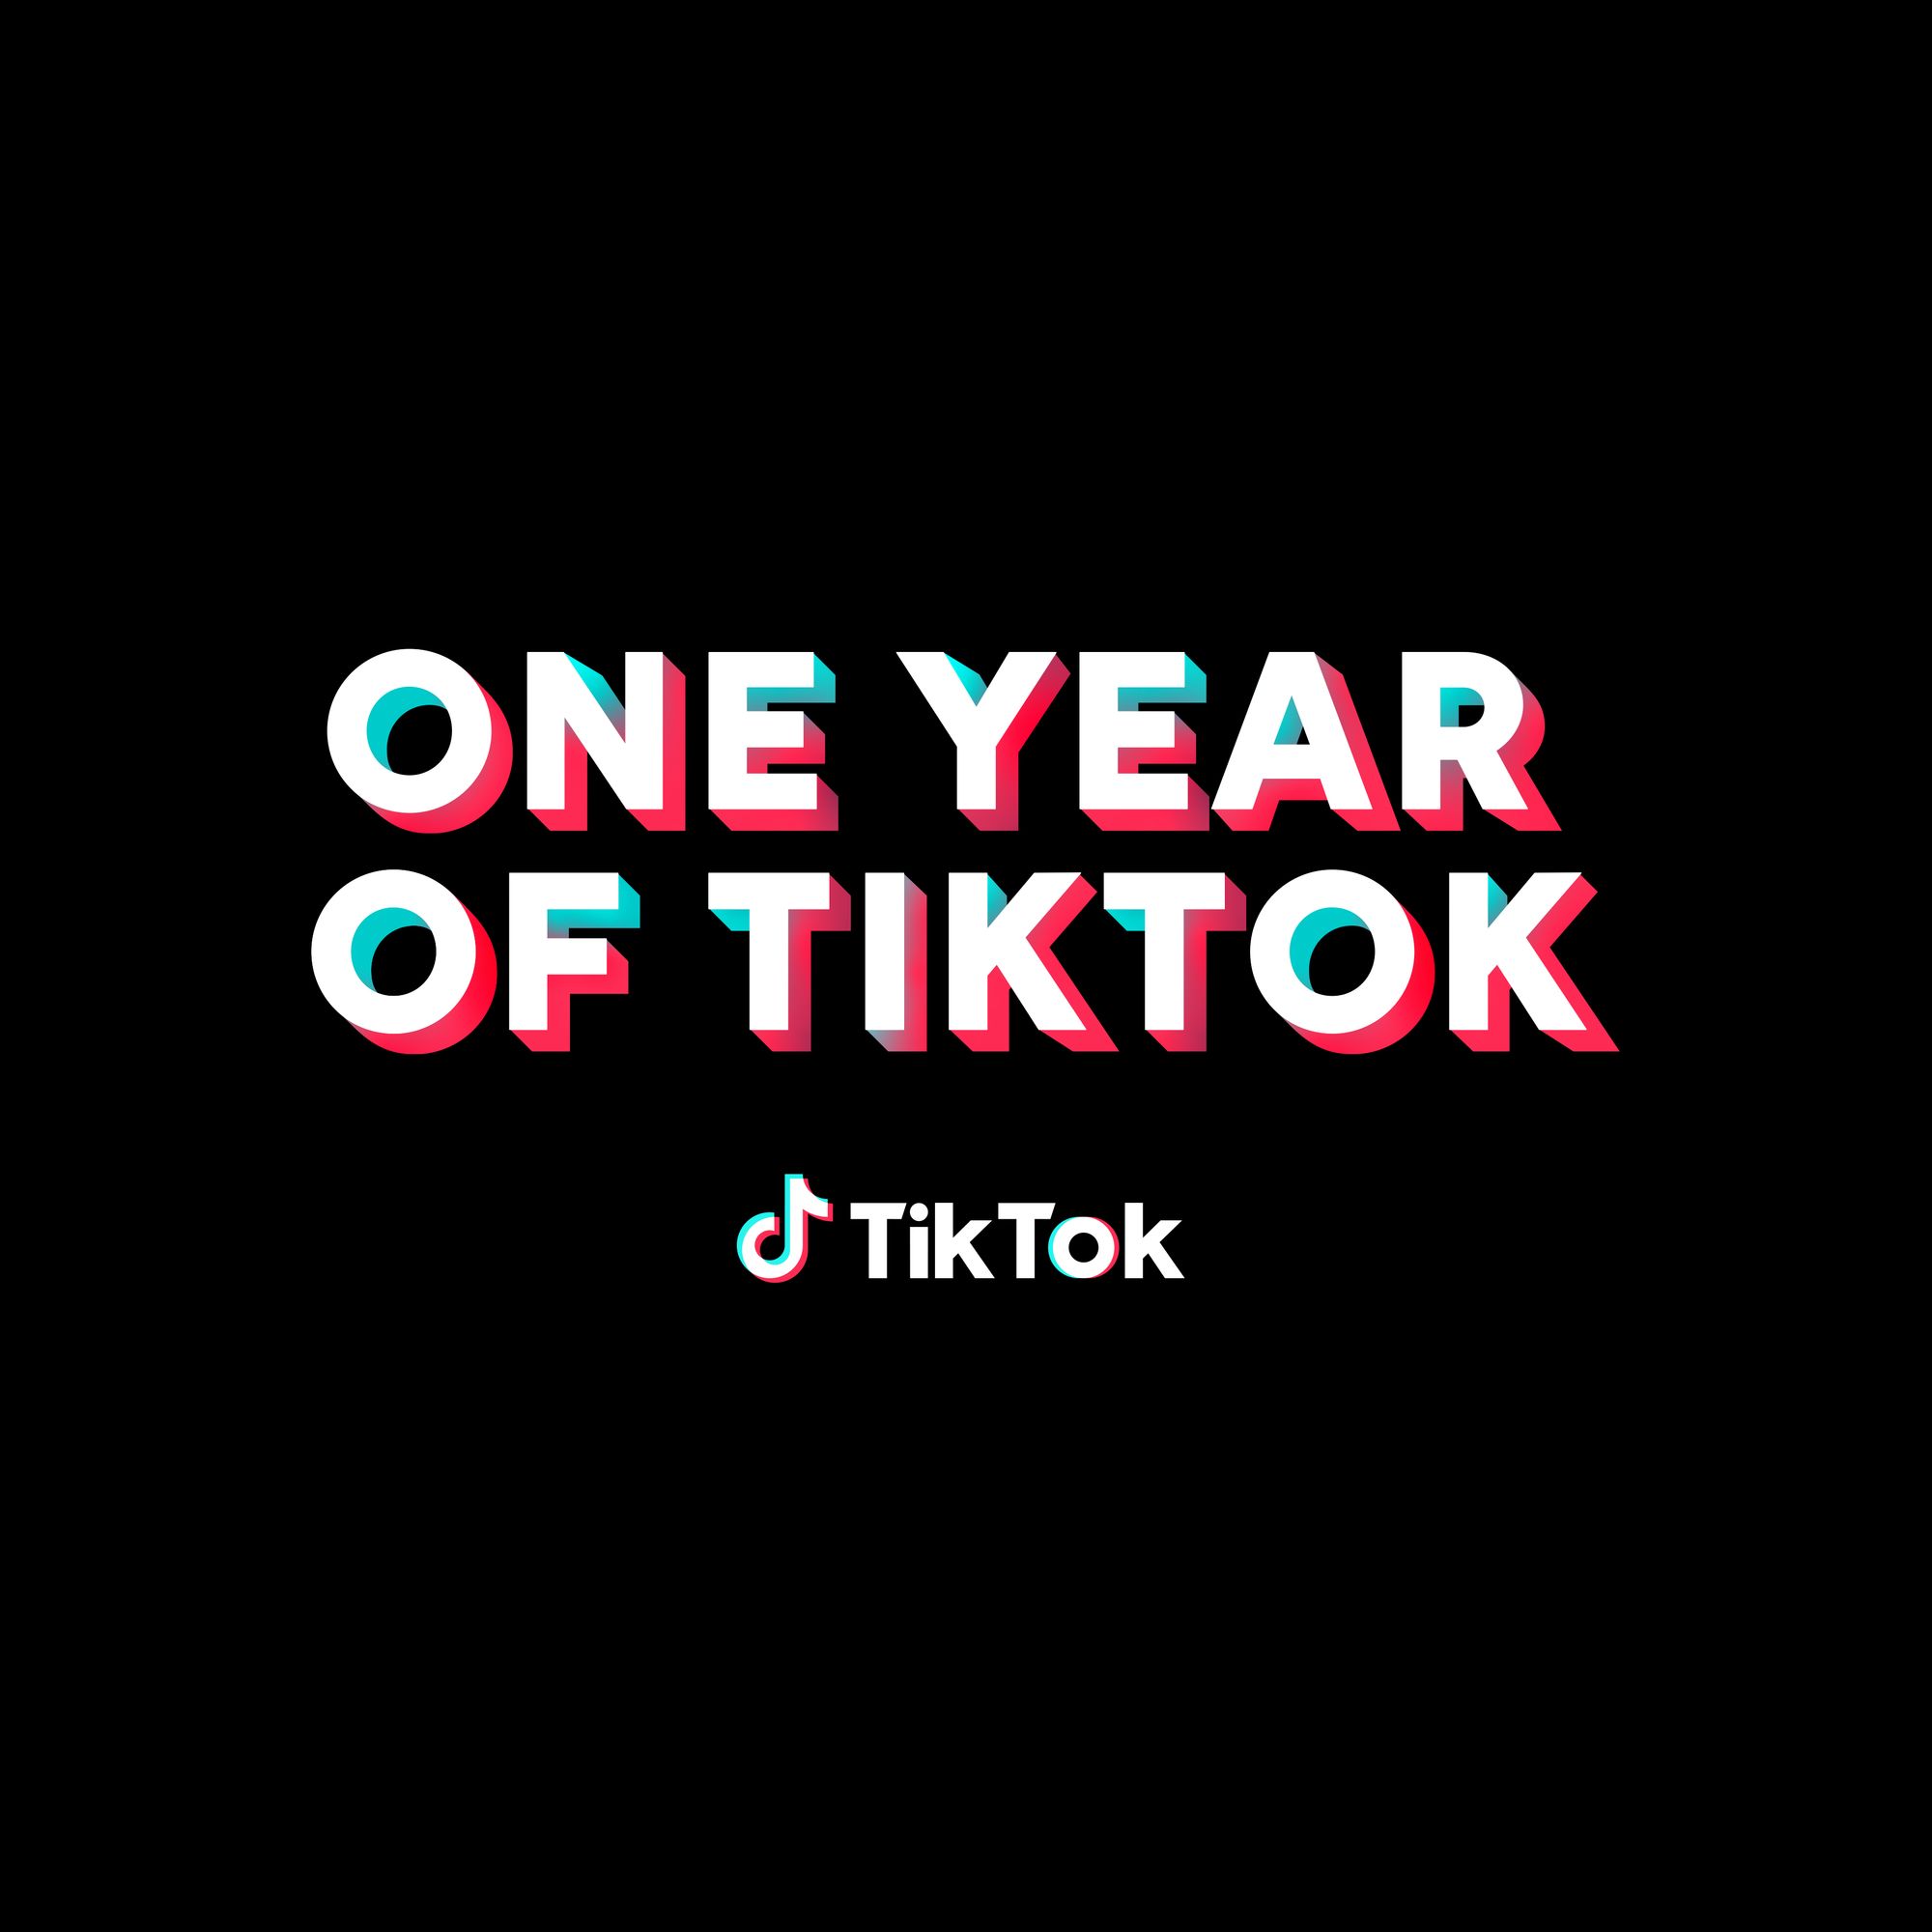 Look back on your 'Year on TikTok